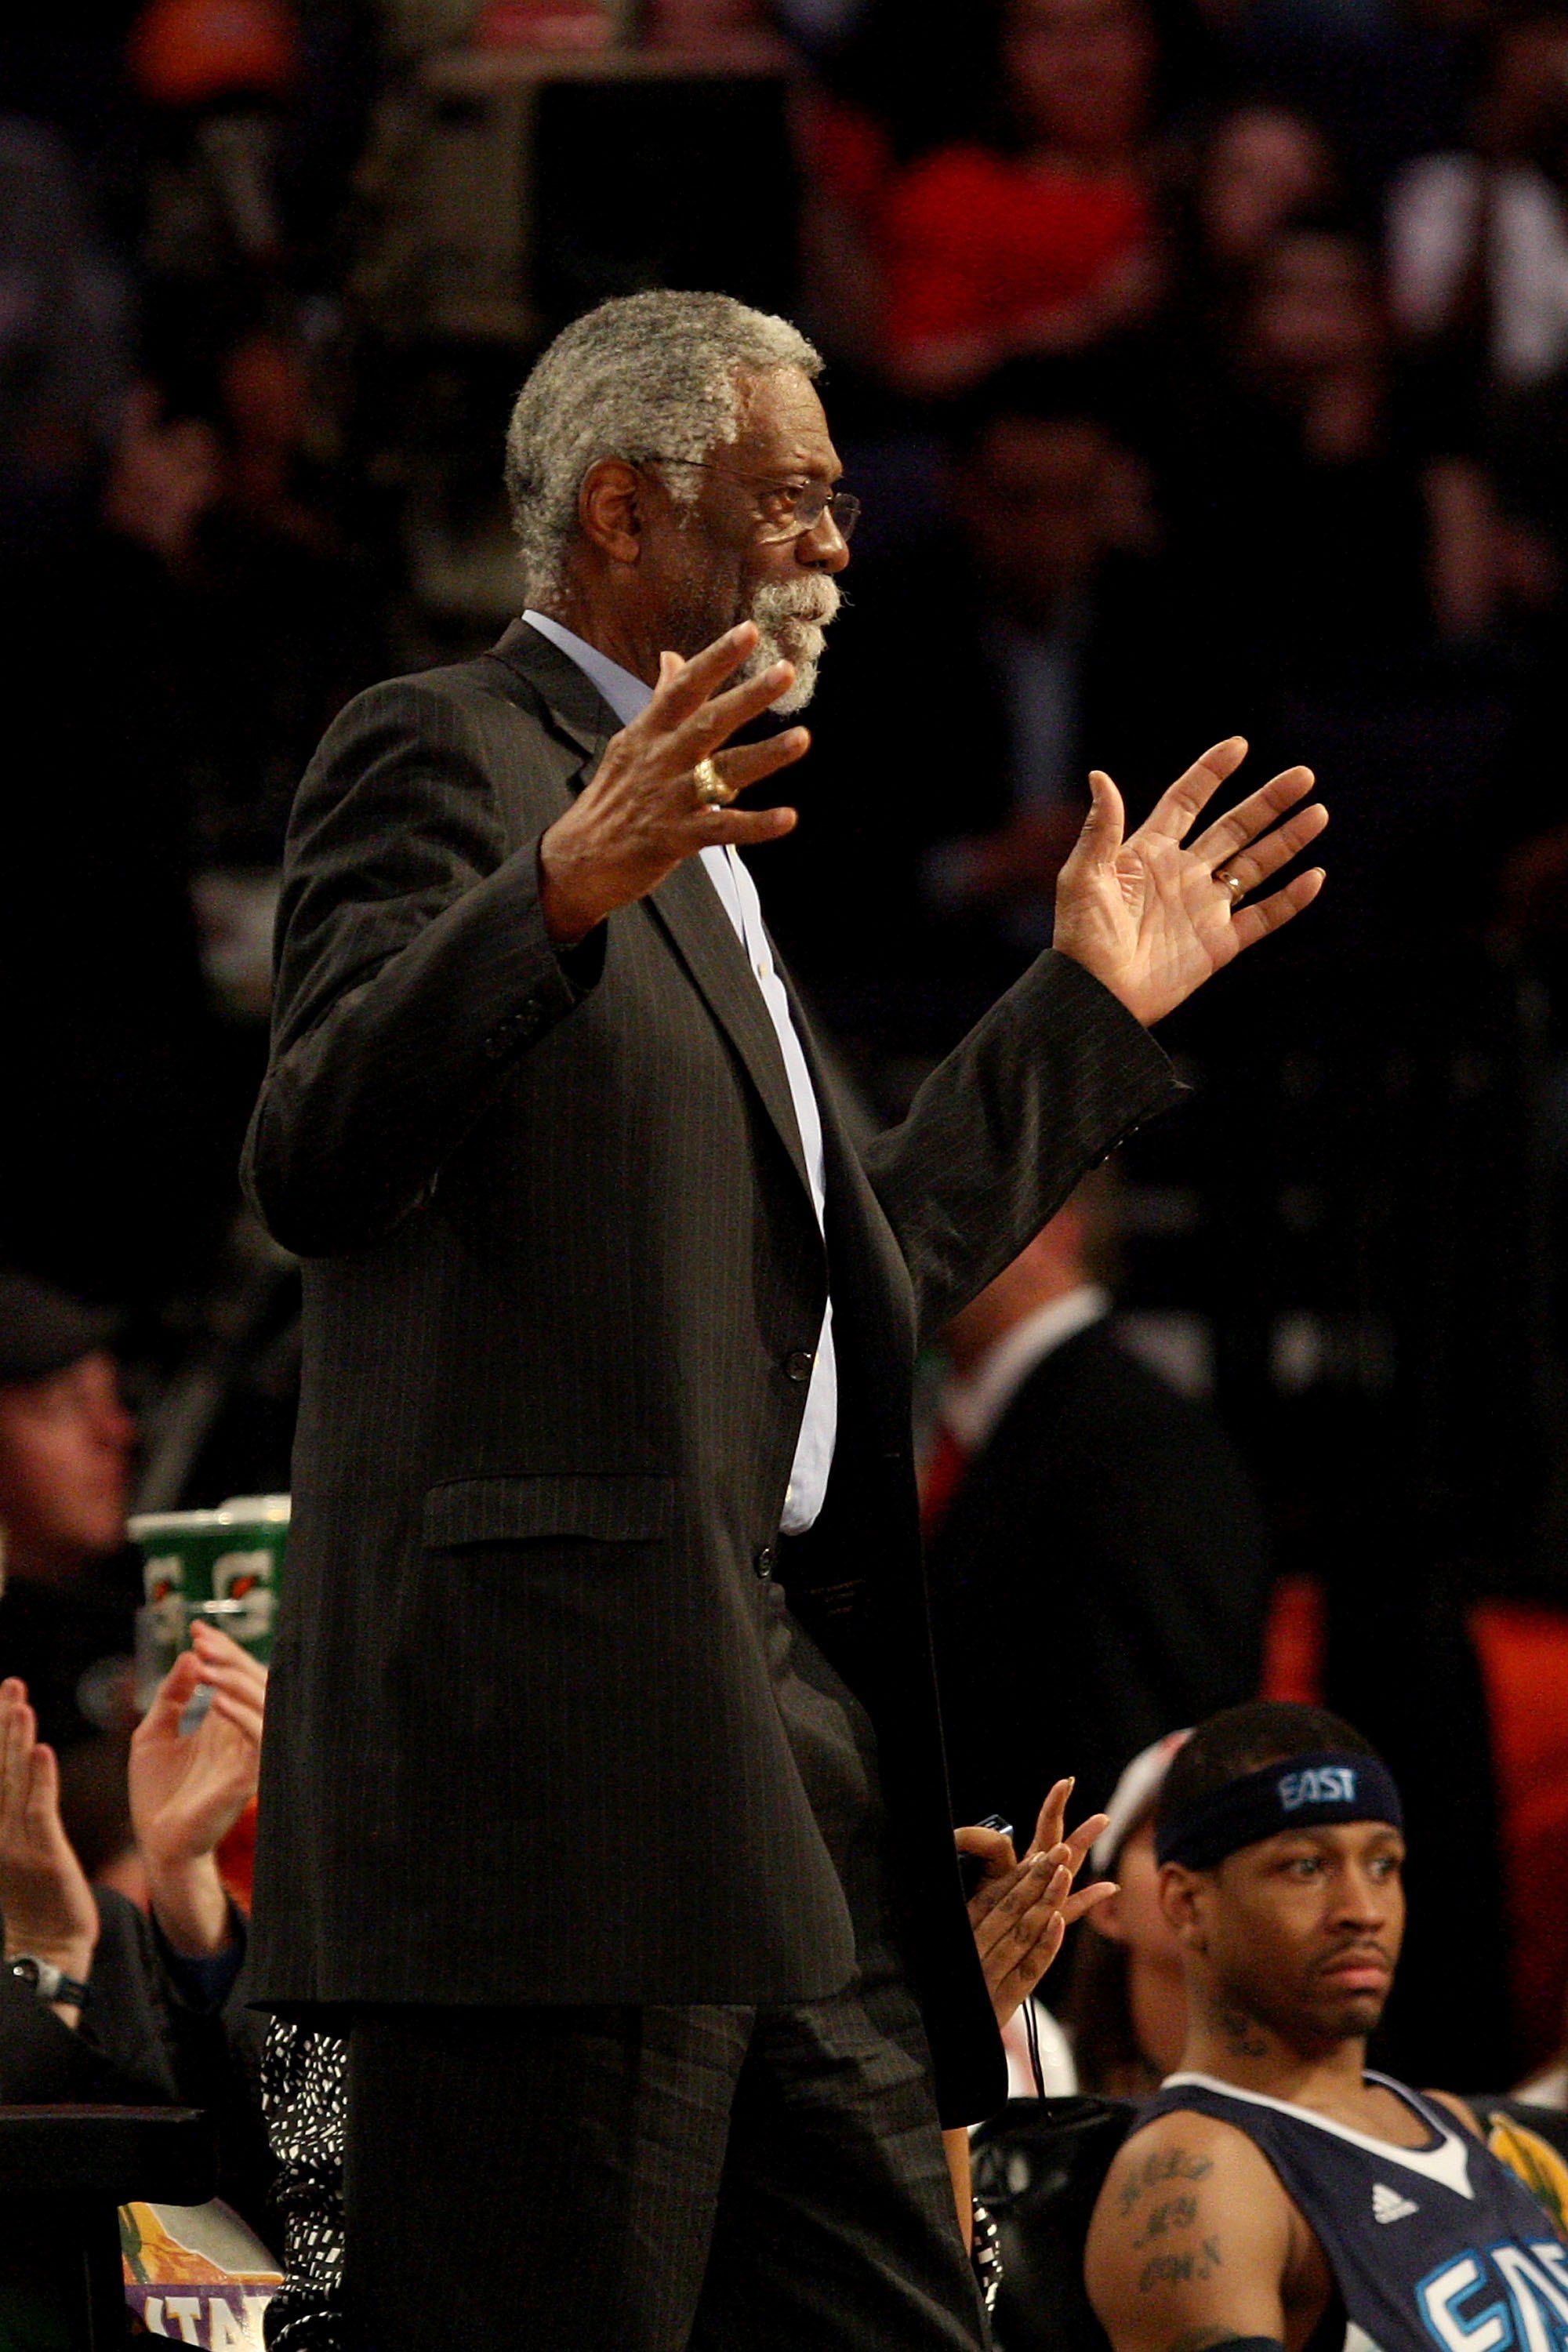 PHOENIX - FEBRUARY 15:  NBA legend Bill Russell is presented with a birthday cake during the 58th NBA All-Star Game, part of 2009 NBA All-Star Weekend at US Airways Center on February 15, 2009 in Phoenix, Arizona.  NOTE TO USER: User expressly acknowledge